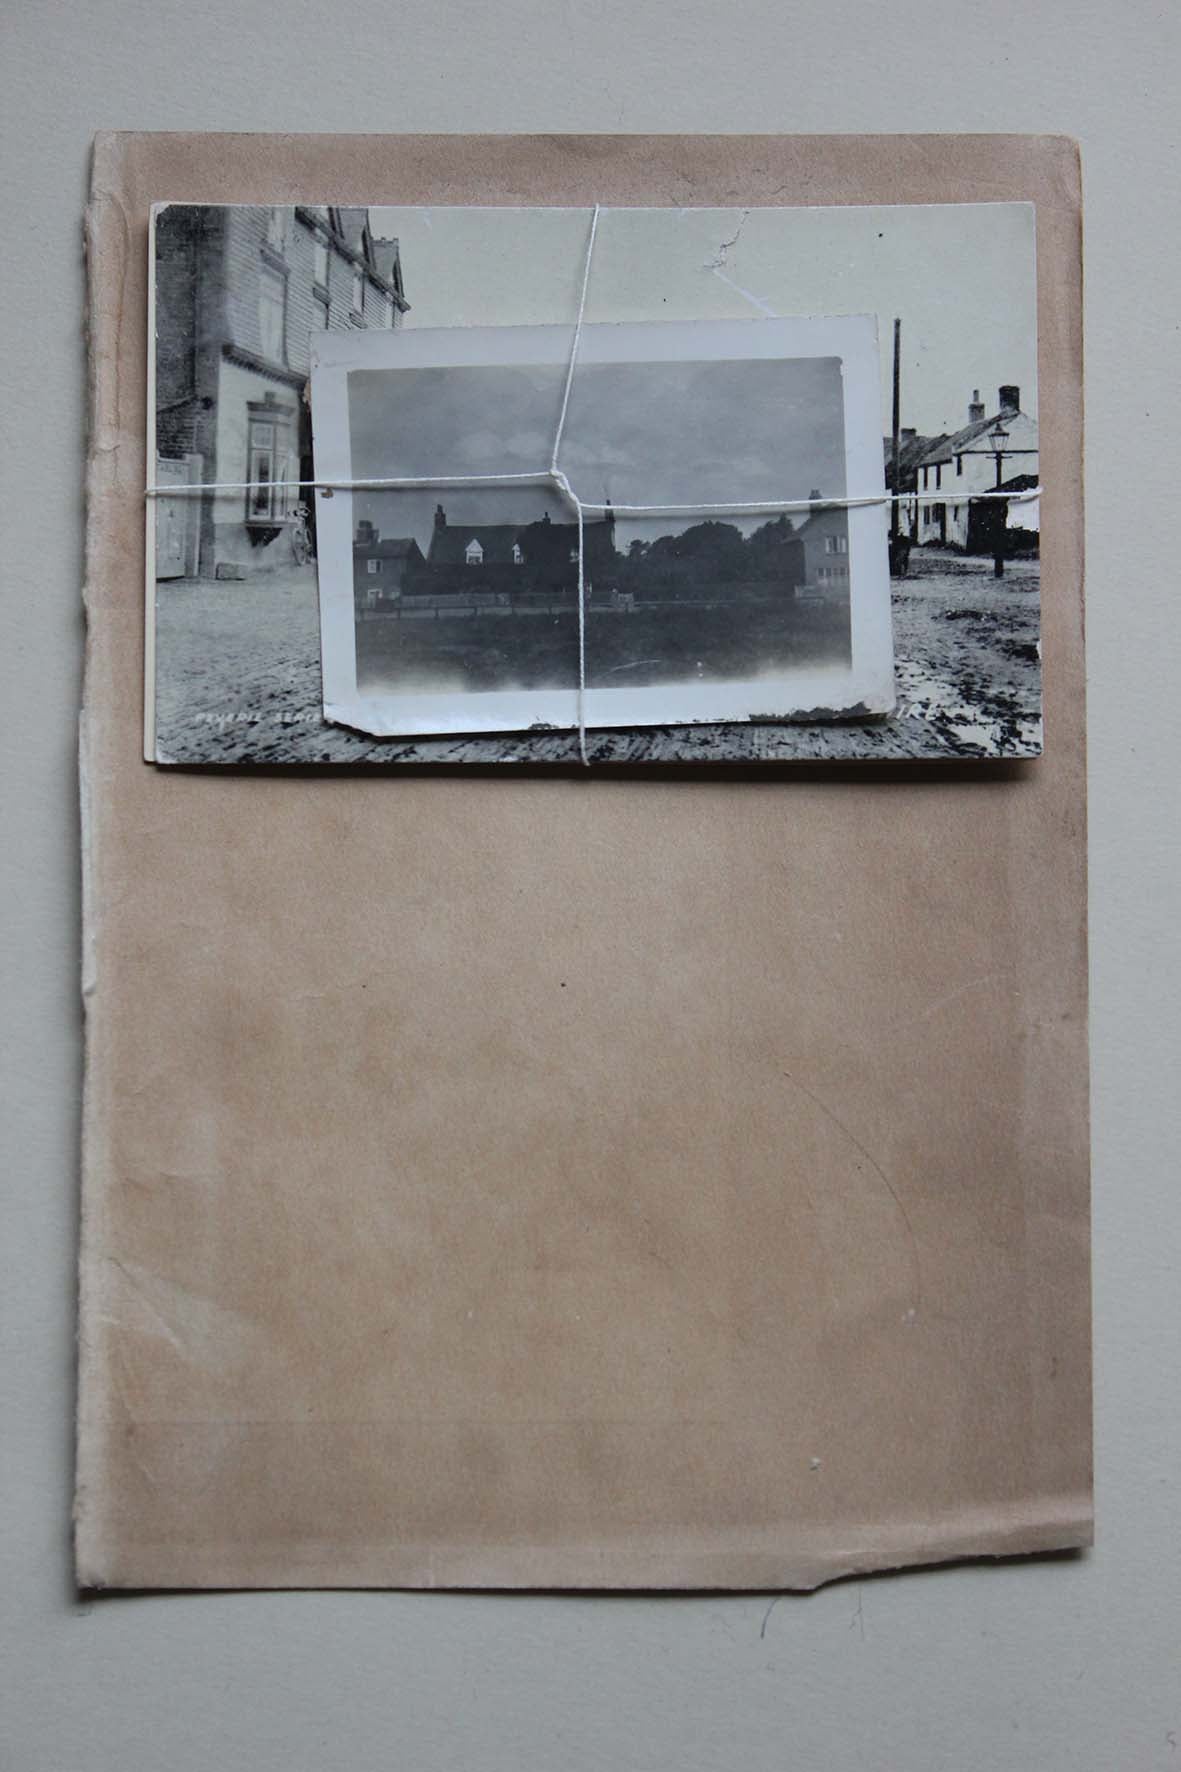 Old Collection of Photographs/Postcards - Streets (three)